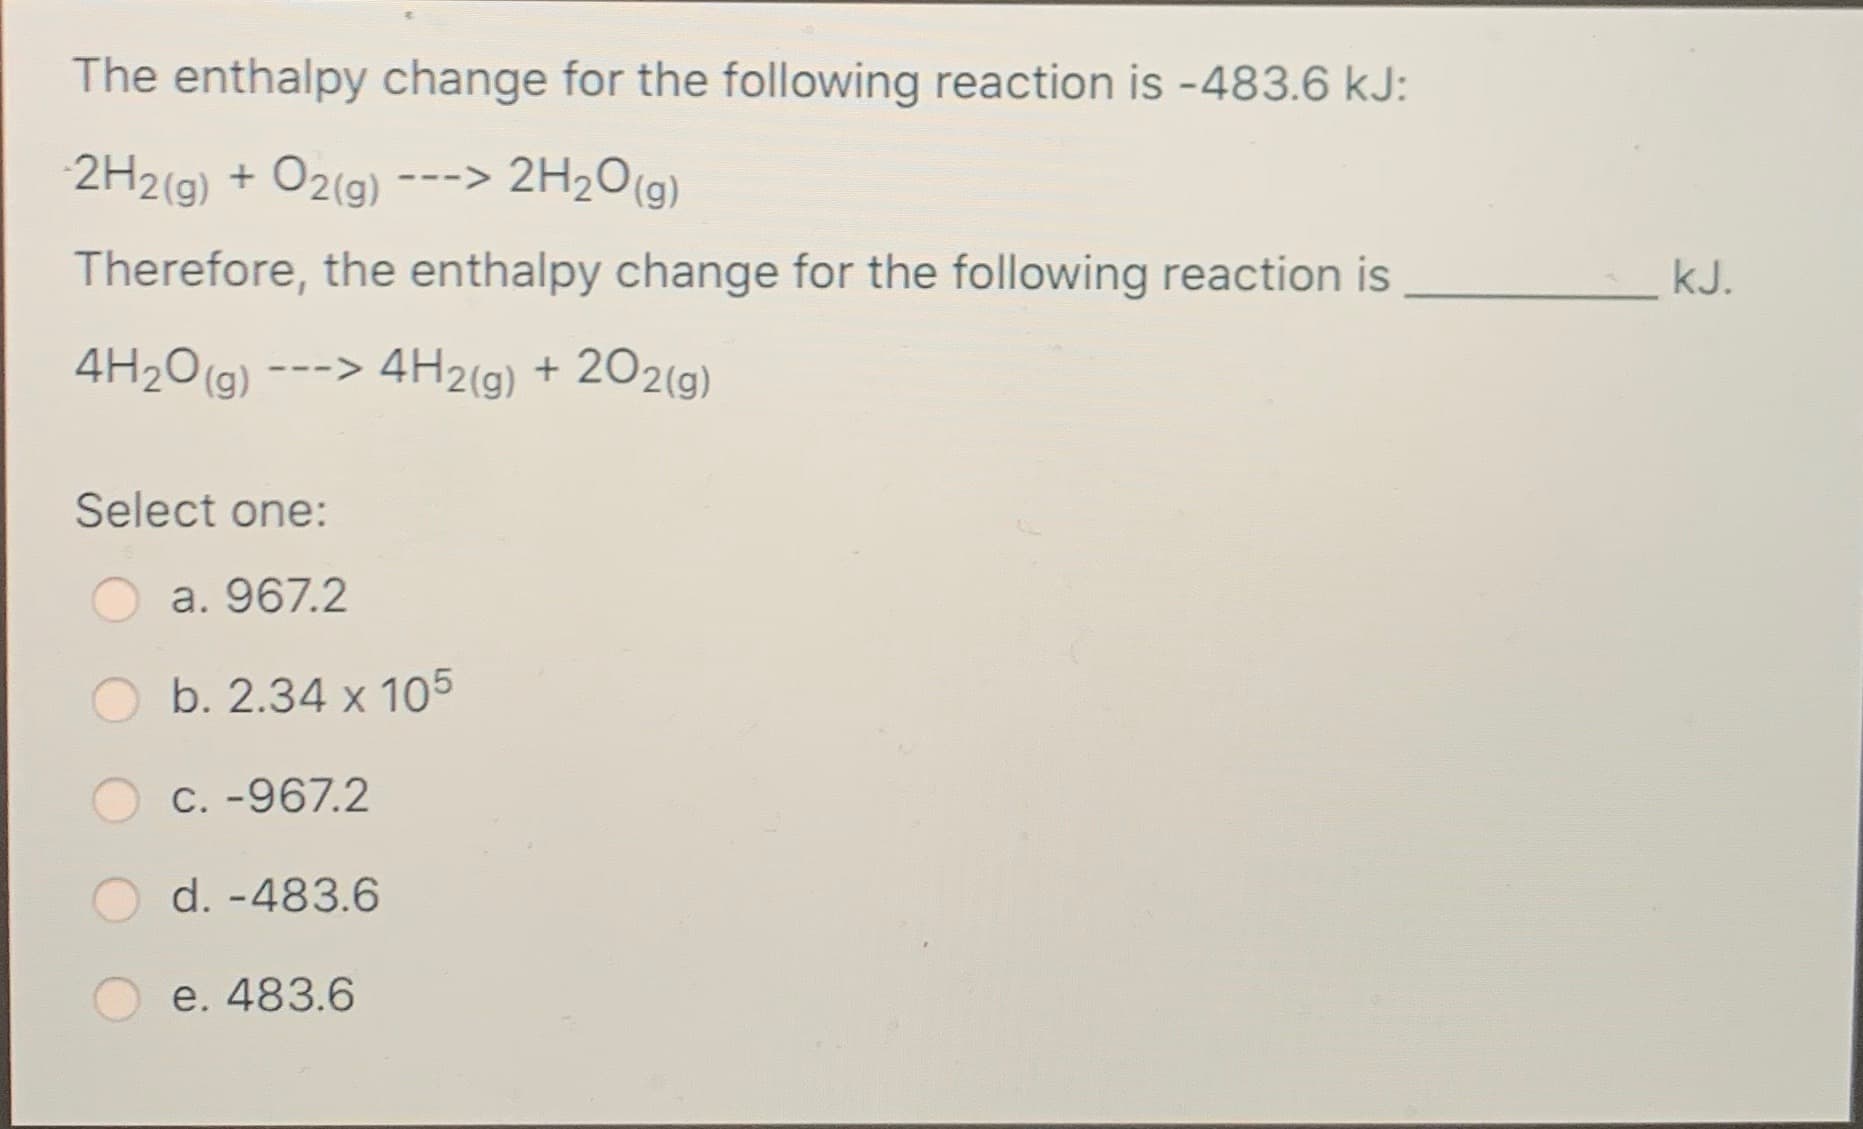 The enthalpy change for the following reaction is -483.6 kJ:
2H2(g) + O2(g)
---> 2H2O(g)
Therefore, the enthalpy change for the following reaction is
kJ.
4H2O(g)
-> 4H2(g) + 202(9)
Select one:
a. 967.2
b. 2.34 x 105
C. -967.2
d. -483.6
e. 483.6
